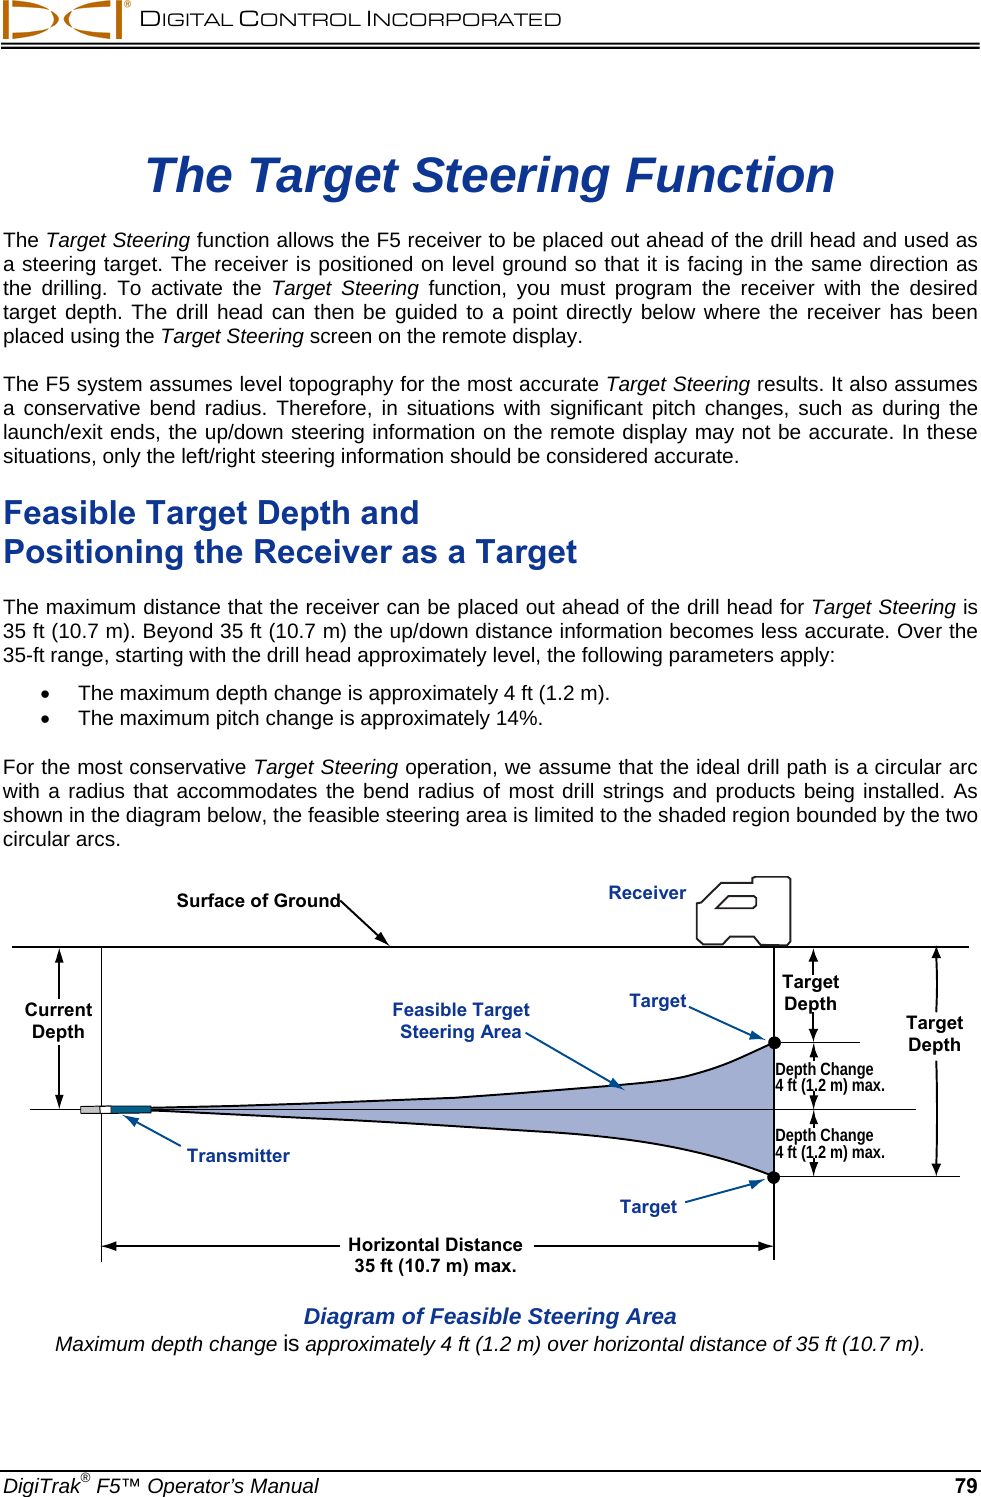  DIGITAL CONTROL INCORPORATED  DigiTrak® F5™ Operator’s Manual 79 The Target Steering Function The Target Steering function allows the F5 receiver to be placed out ahead of the drill head and used as a steering target. The receiver is positioned on level ground so that it is facing in the same direction as the drilling. To activate the Target Steering function, you must program the receiver with the desired target depth. The drill head can then be guided to a point directly below where the receiver has been placed using the Target Steering screen on the remote display. The F5 system assumes level topography for the most accurate Target Steering results. It also assumes a conservative bend radius. Therefore, in situations with significant pitch changes, such as during the launch/exit ends, the up/down steering information on the remote display may not be accurate. In these situations, only the left/right steering information should be considered accurate.  Feasible Target Depth and  Positioning the Receiver as a Target The maximum distance that the receiver can be placed out ahead of the drill head for Target Steering is 35 ft (10.7 m). Beyond 35 ft (10.7 m) the up/down distance information becomes less accurate. Over the 35-ft range, starting with the drill head approximately level, the following parameters apply:   The maximum depth change is approximately 4 ft (1.2 m).    The maximum pitch change is approximately 14%. For the most conservative Target Steering operation, we assume that the ideal drill path is a circular arc with a radius that accommodates the bend radius of most drill strings and products being installed. As shown in the diagram below, the feasible steering area is limited to the shaded region bounded by the two circular arcs.  Diagram of Feasible Steering Area Maximum depth change is approximately 4 ft (1.2 m) over horizontal distance of 35 ft (10.7 m). Surface of Ground  ReceiverTargetTargetFeasible Target Steering Area Transmitter Current Depth Horizontal Distance 35 ft (10.7 m) max. Depth Change  4 ft (1.2 m) max. Target Depth Target Depth Depth Change  4 ft (1.2 m) max. 